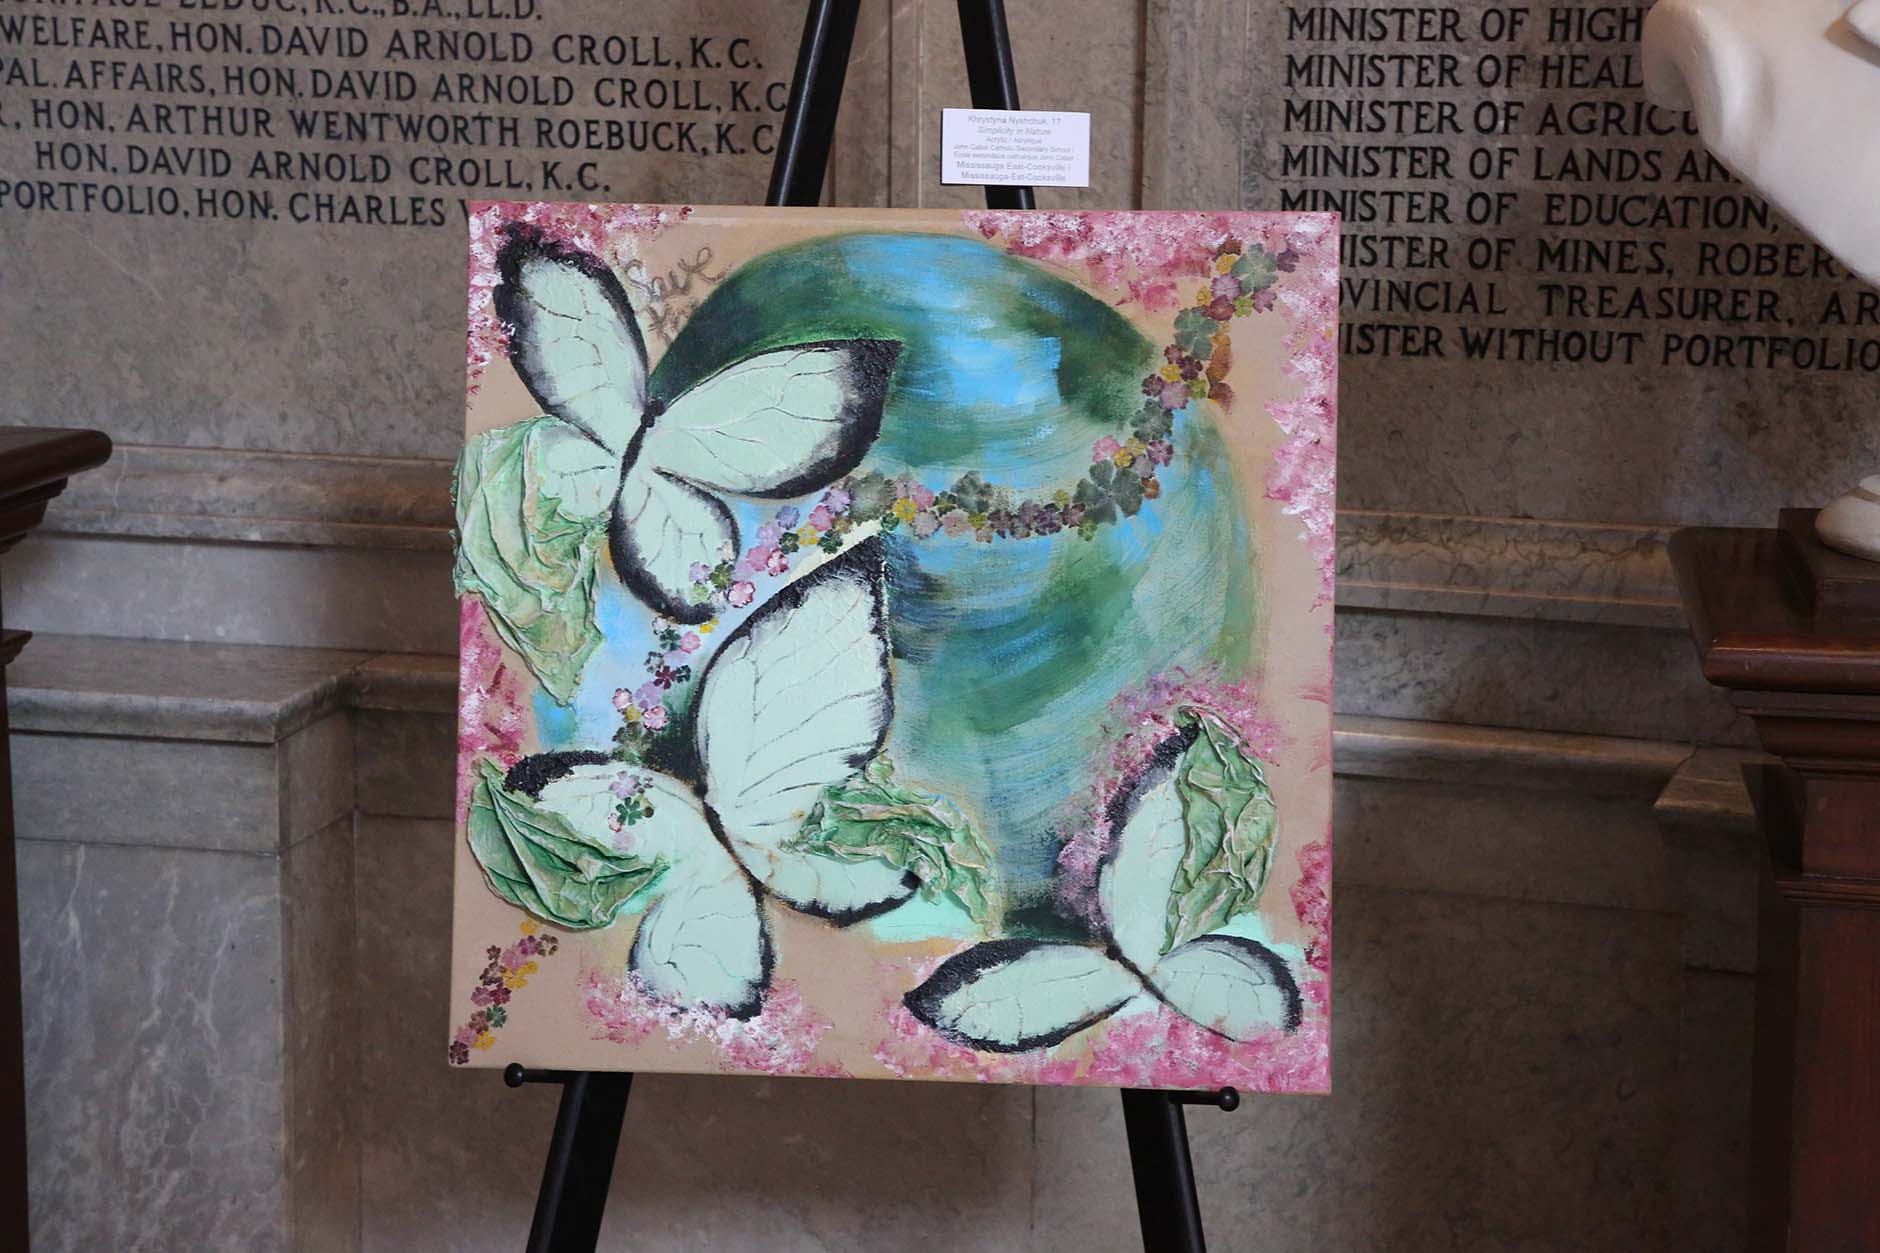 A painting by a student artist in the 2019 Youth Arts Program